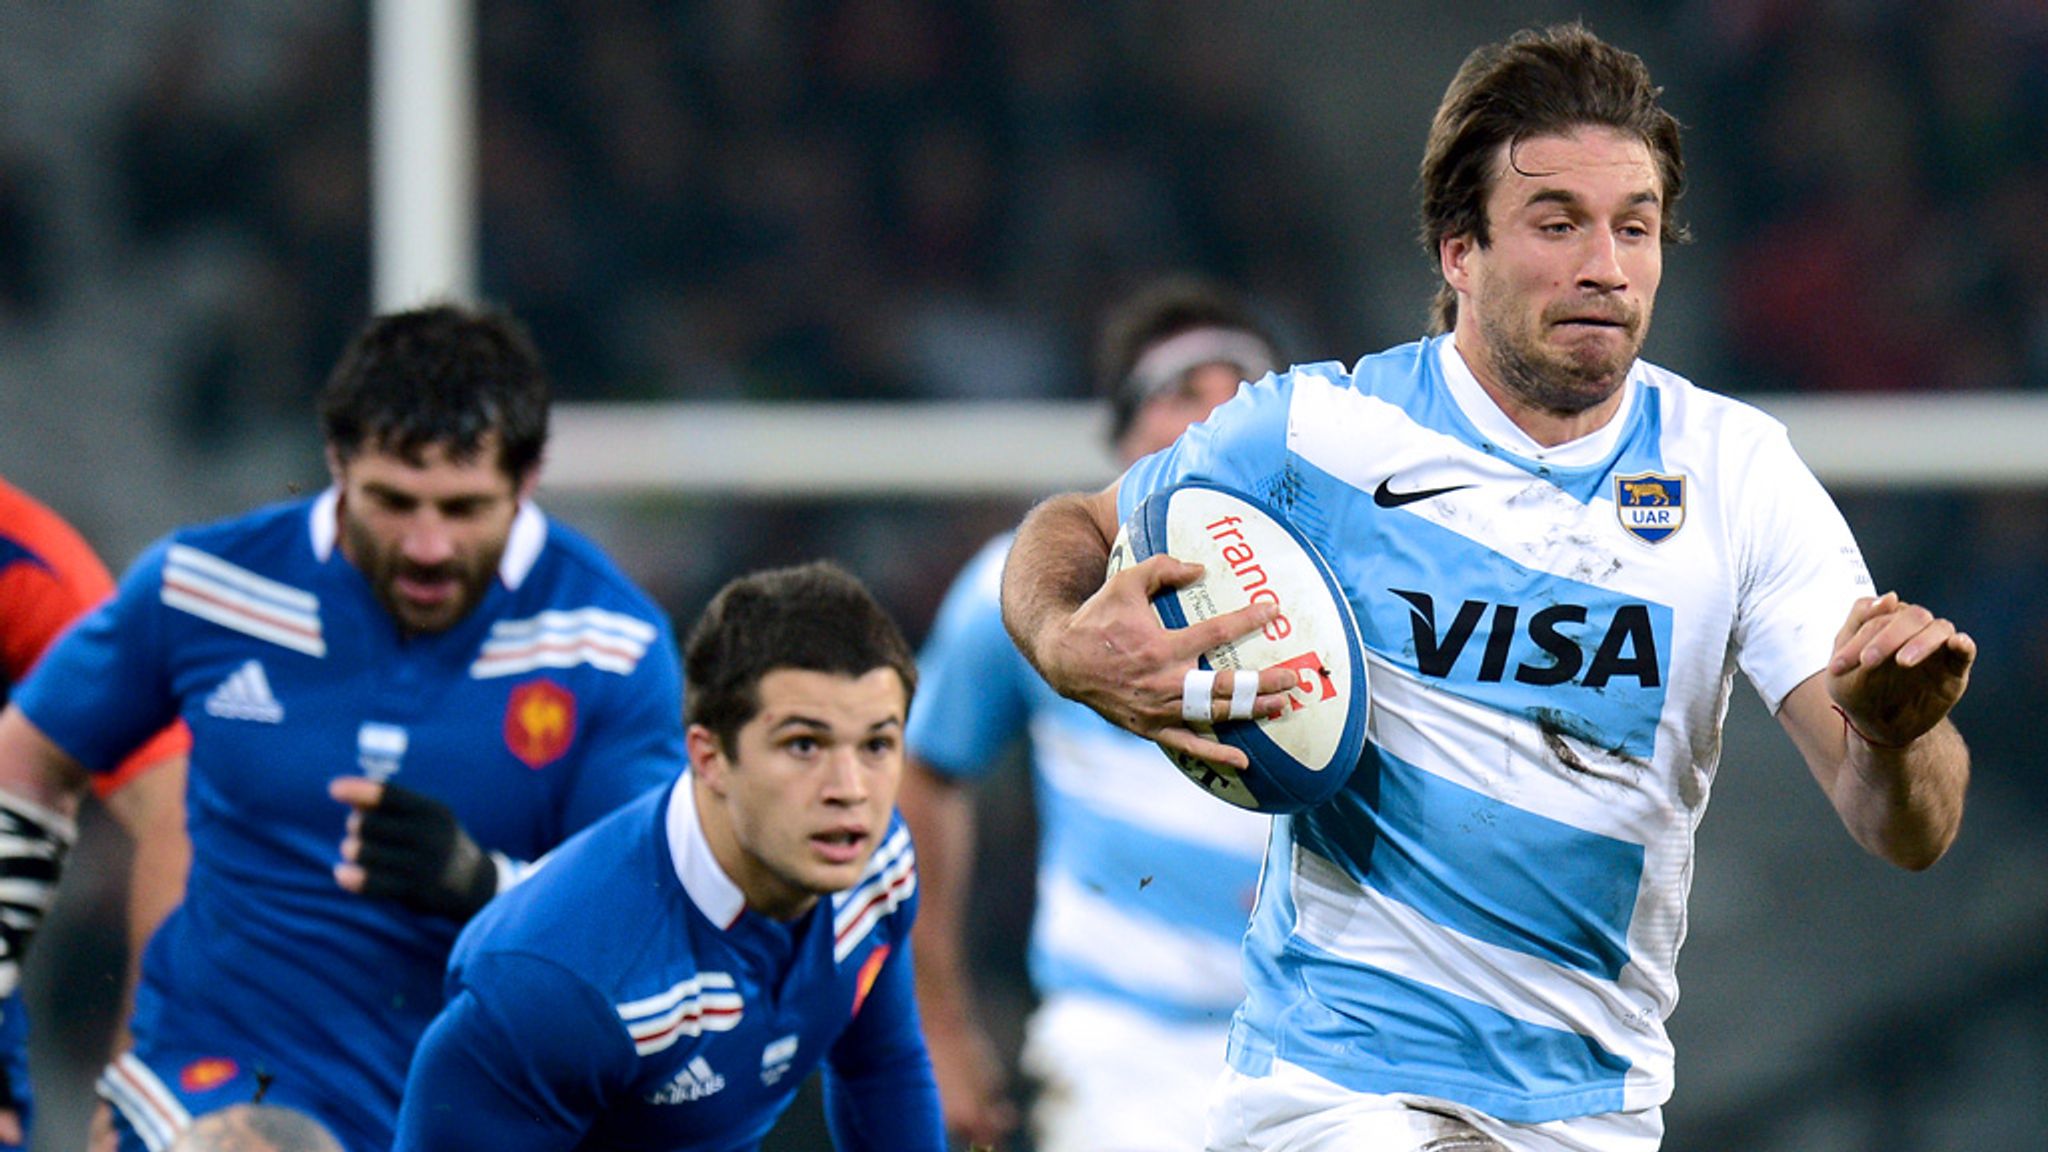 France beat Argentina 39-22 in rugby friendly